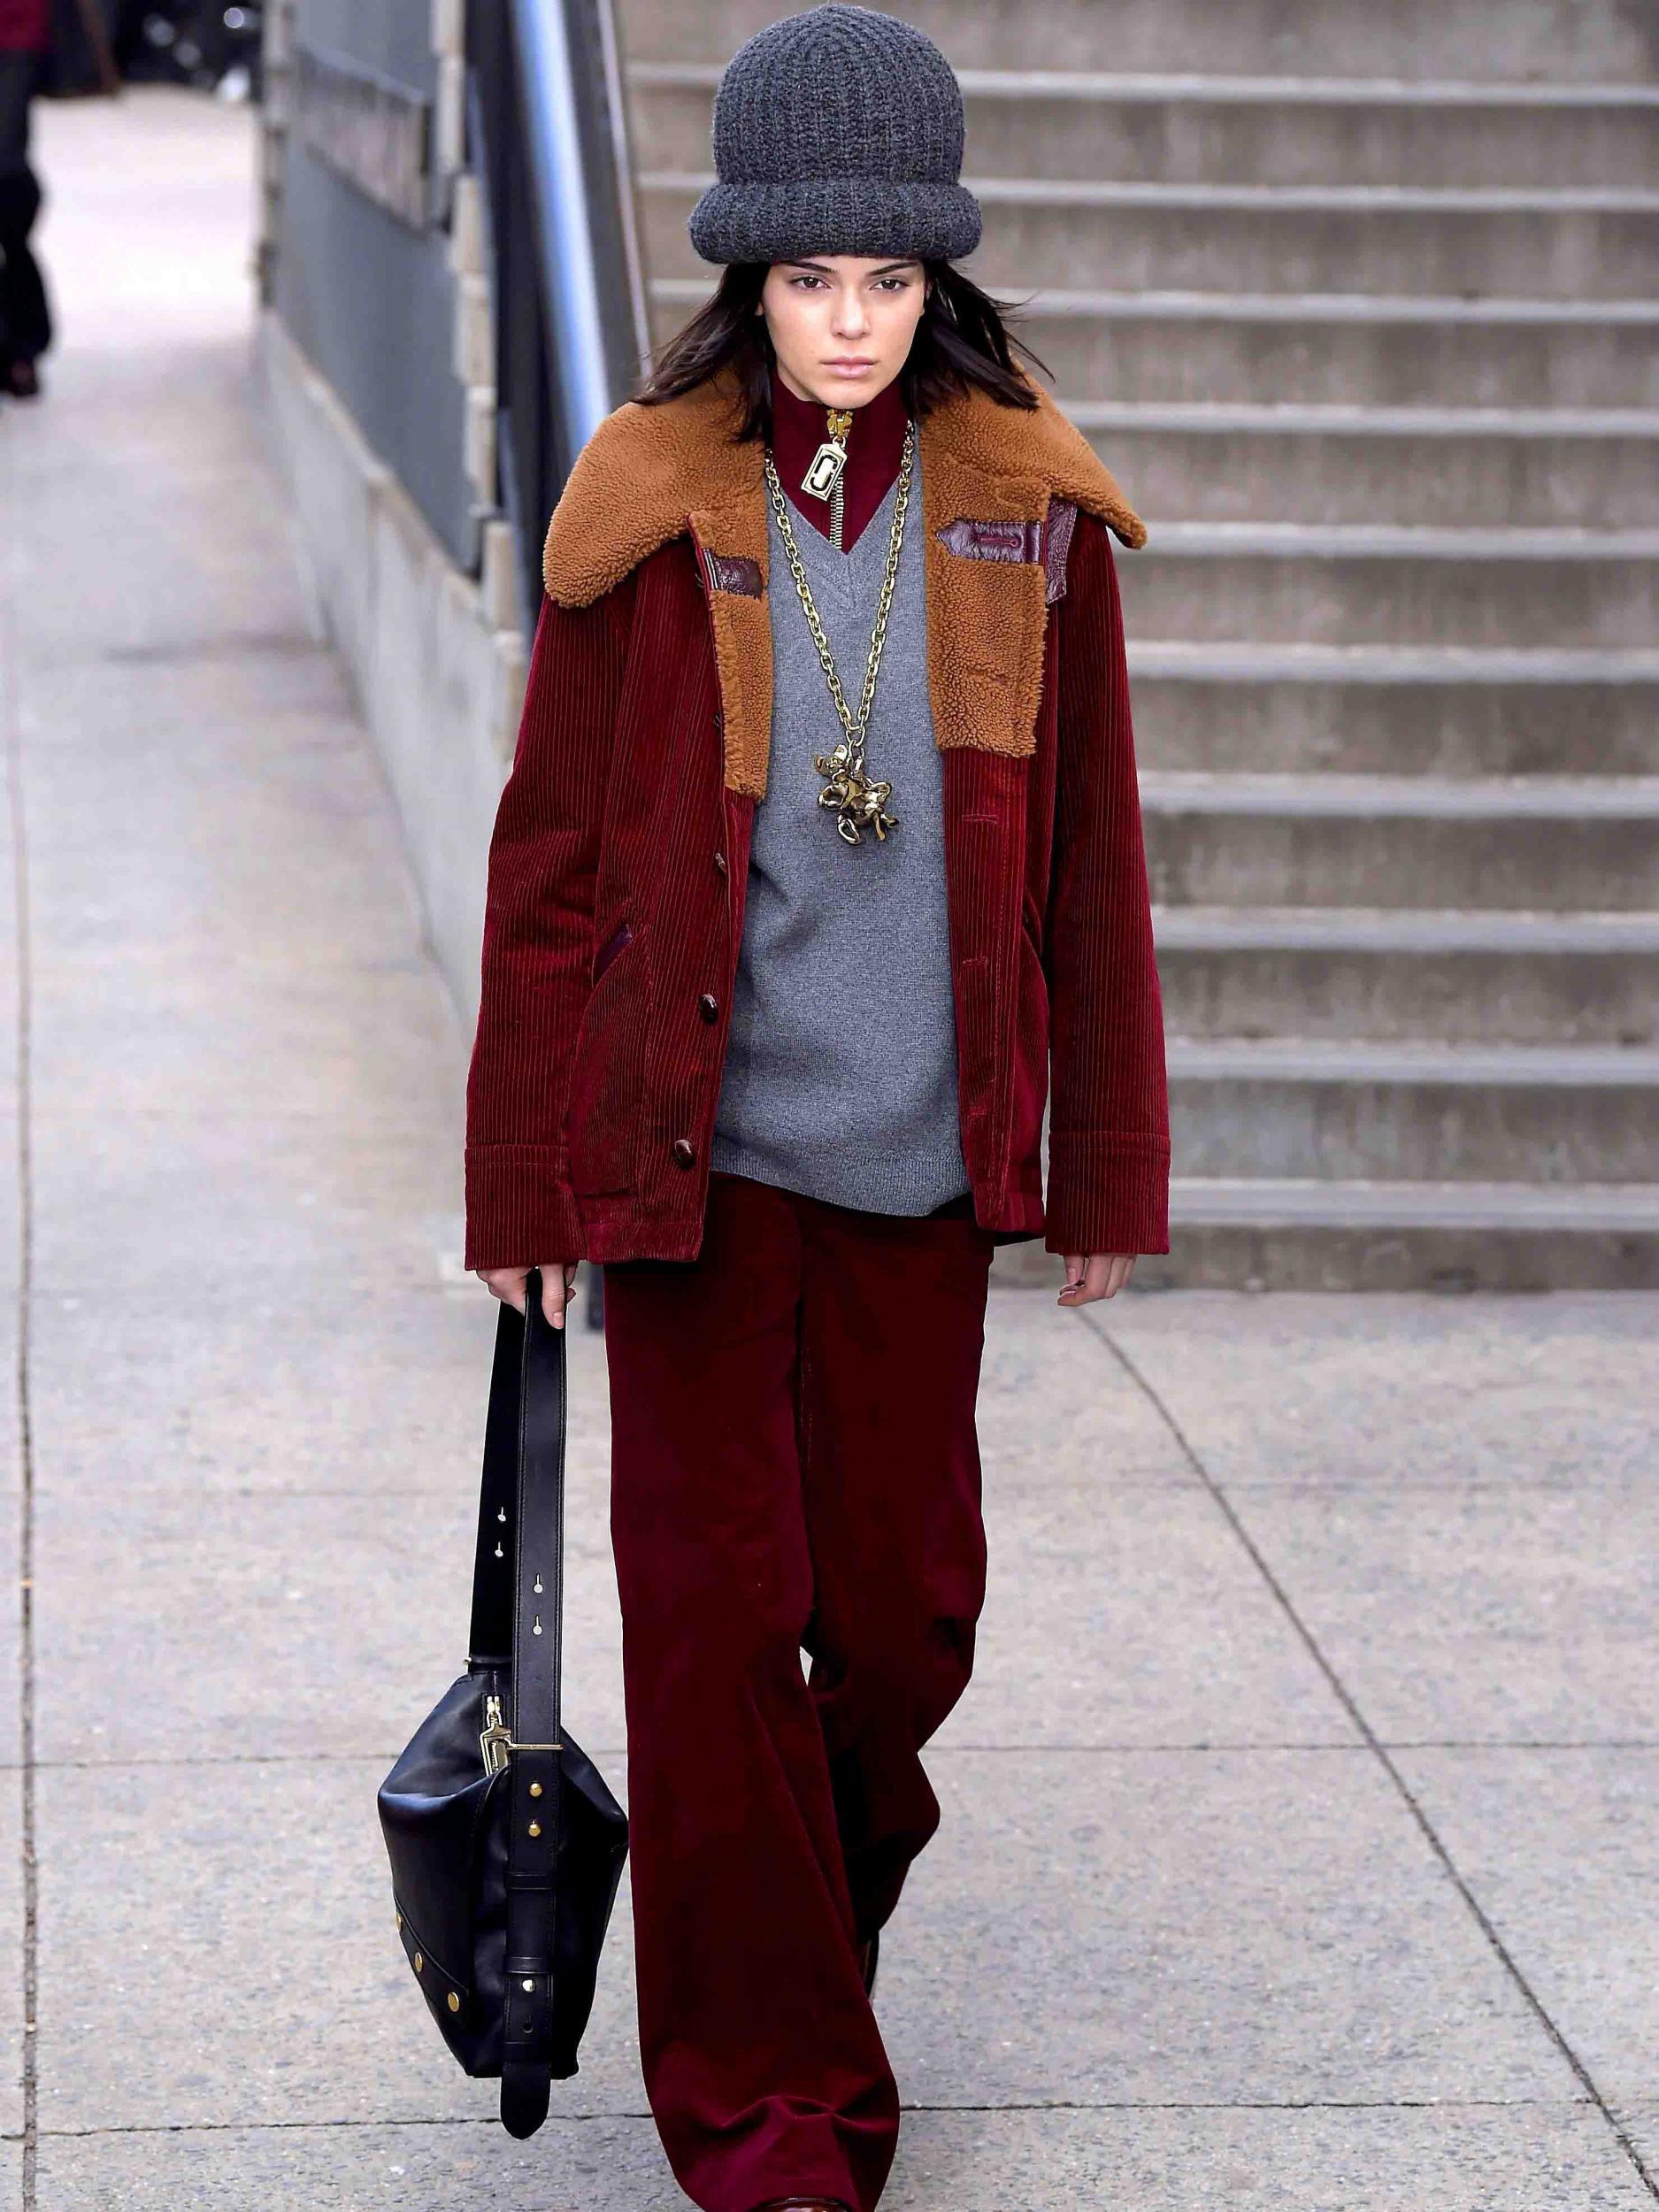 Kendall Jenner in cords at Marc Jacobs sealed the fabric’s welcome into the fashion fold